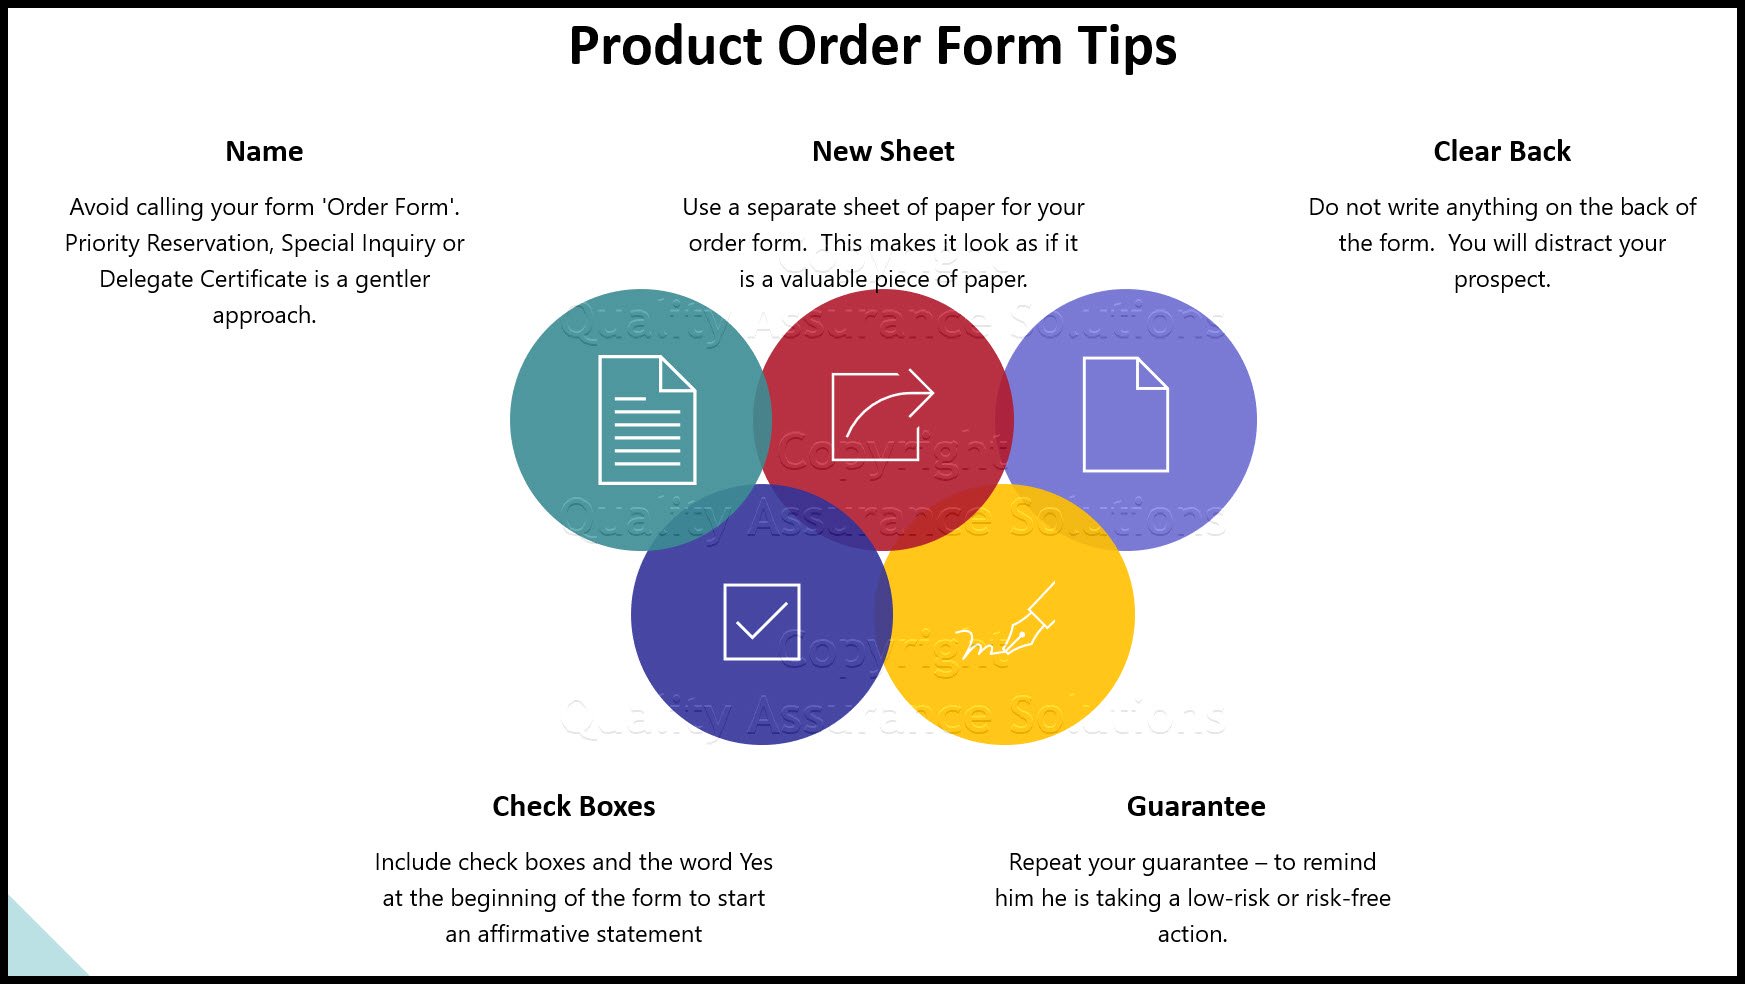 10 Rules to creating your magnetic, irresistible product order form template.